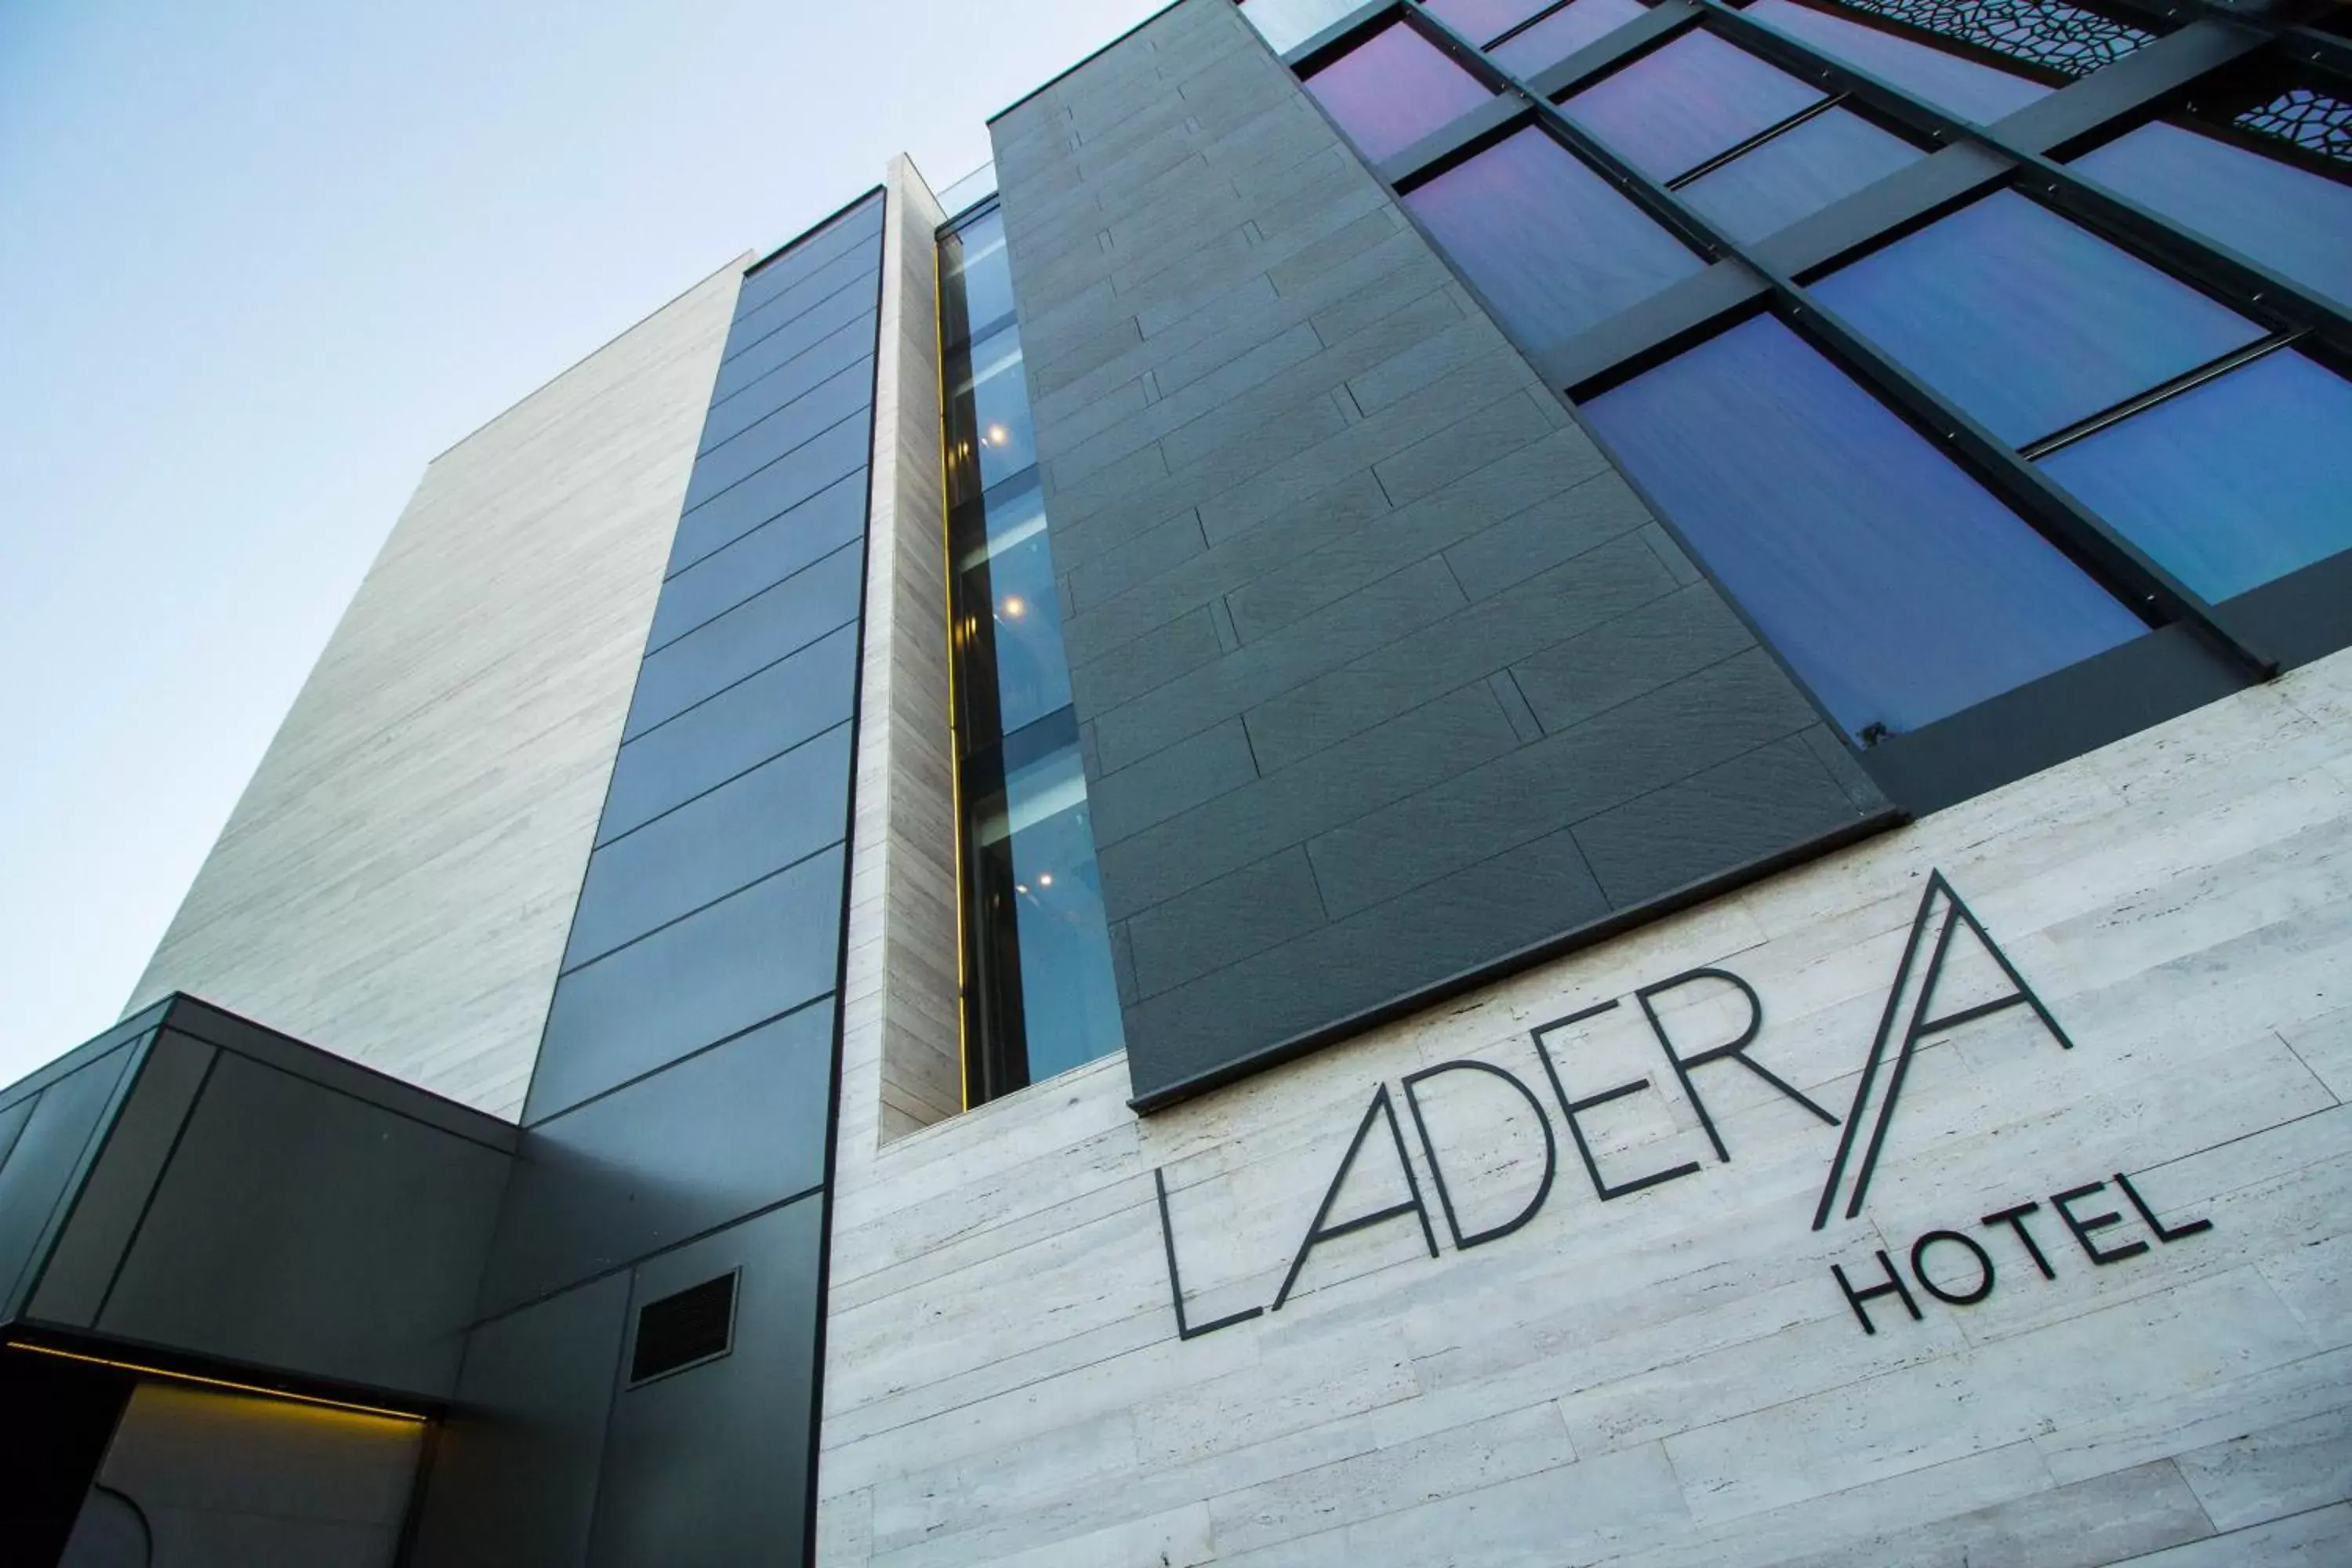 Property Building in Ladera Boutique Hotel